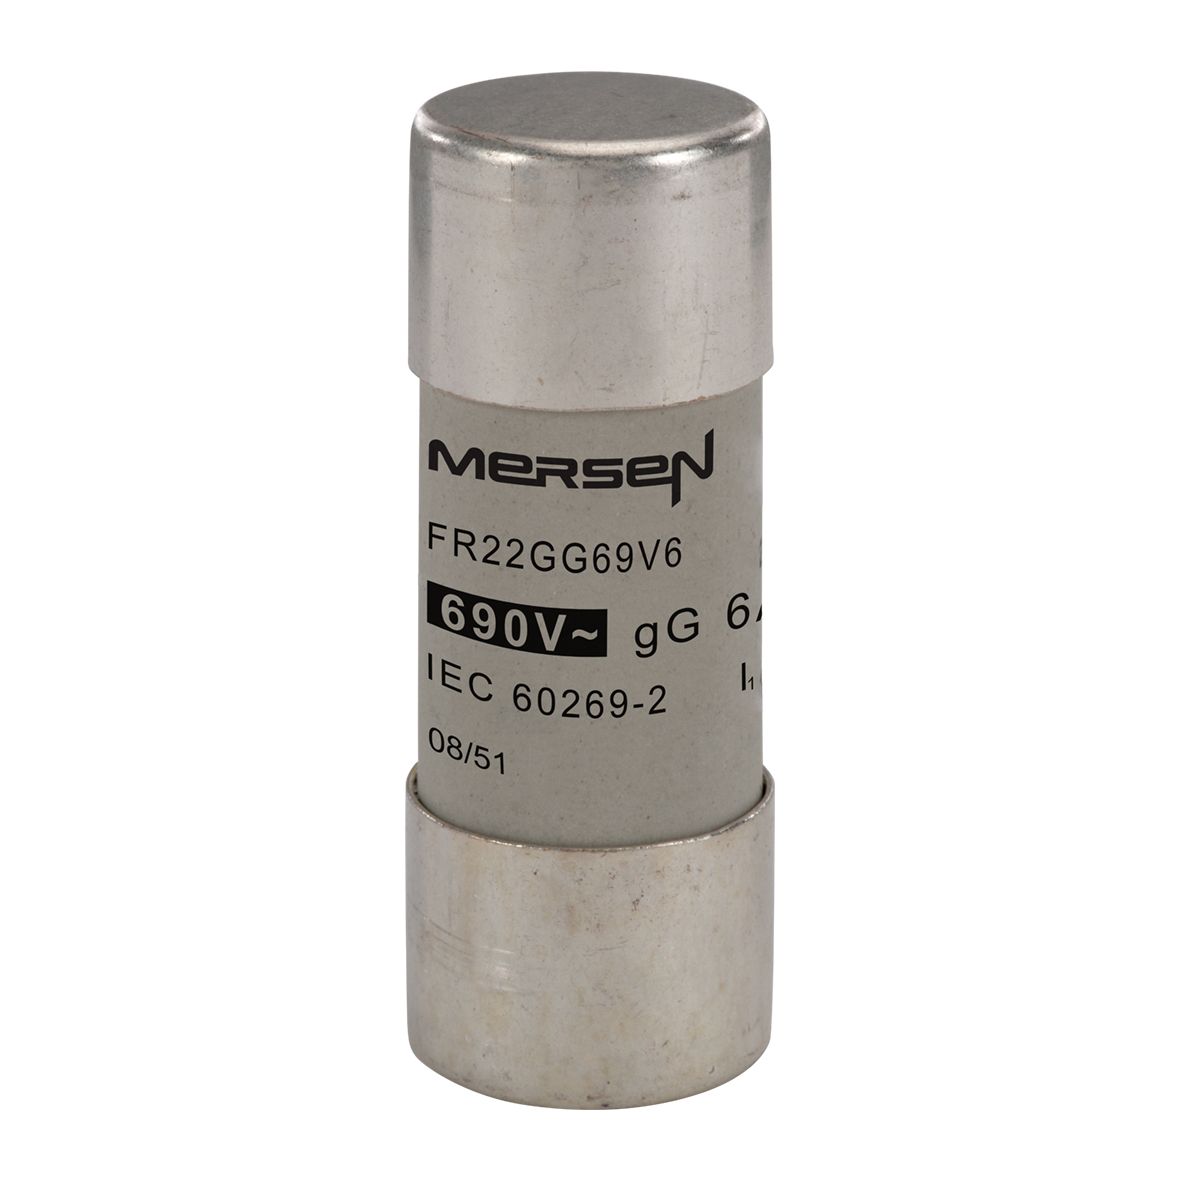 P222216 - Cylindrical fuse-link gG 690VAC 22.2x58, 6A